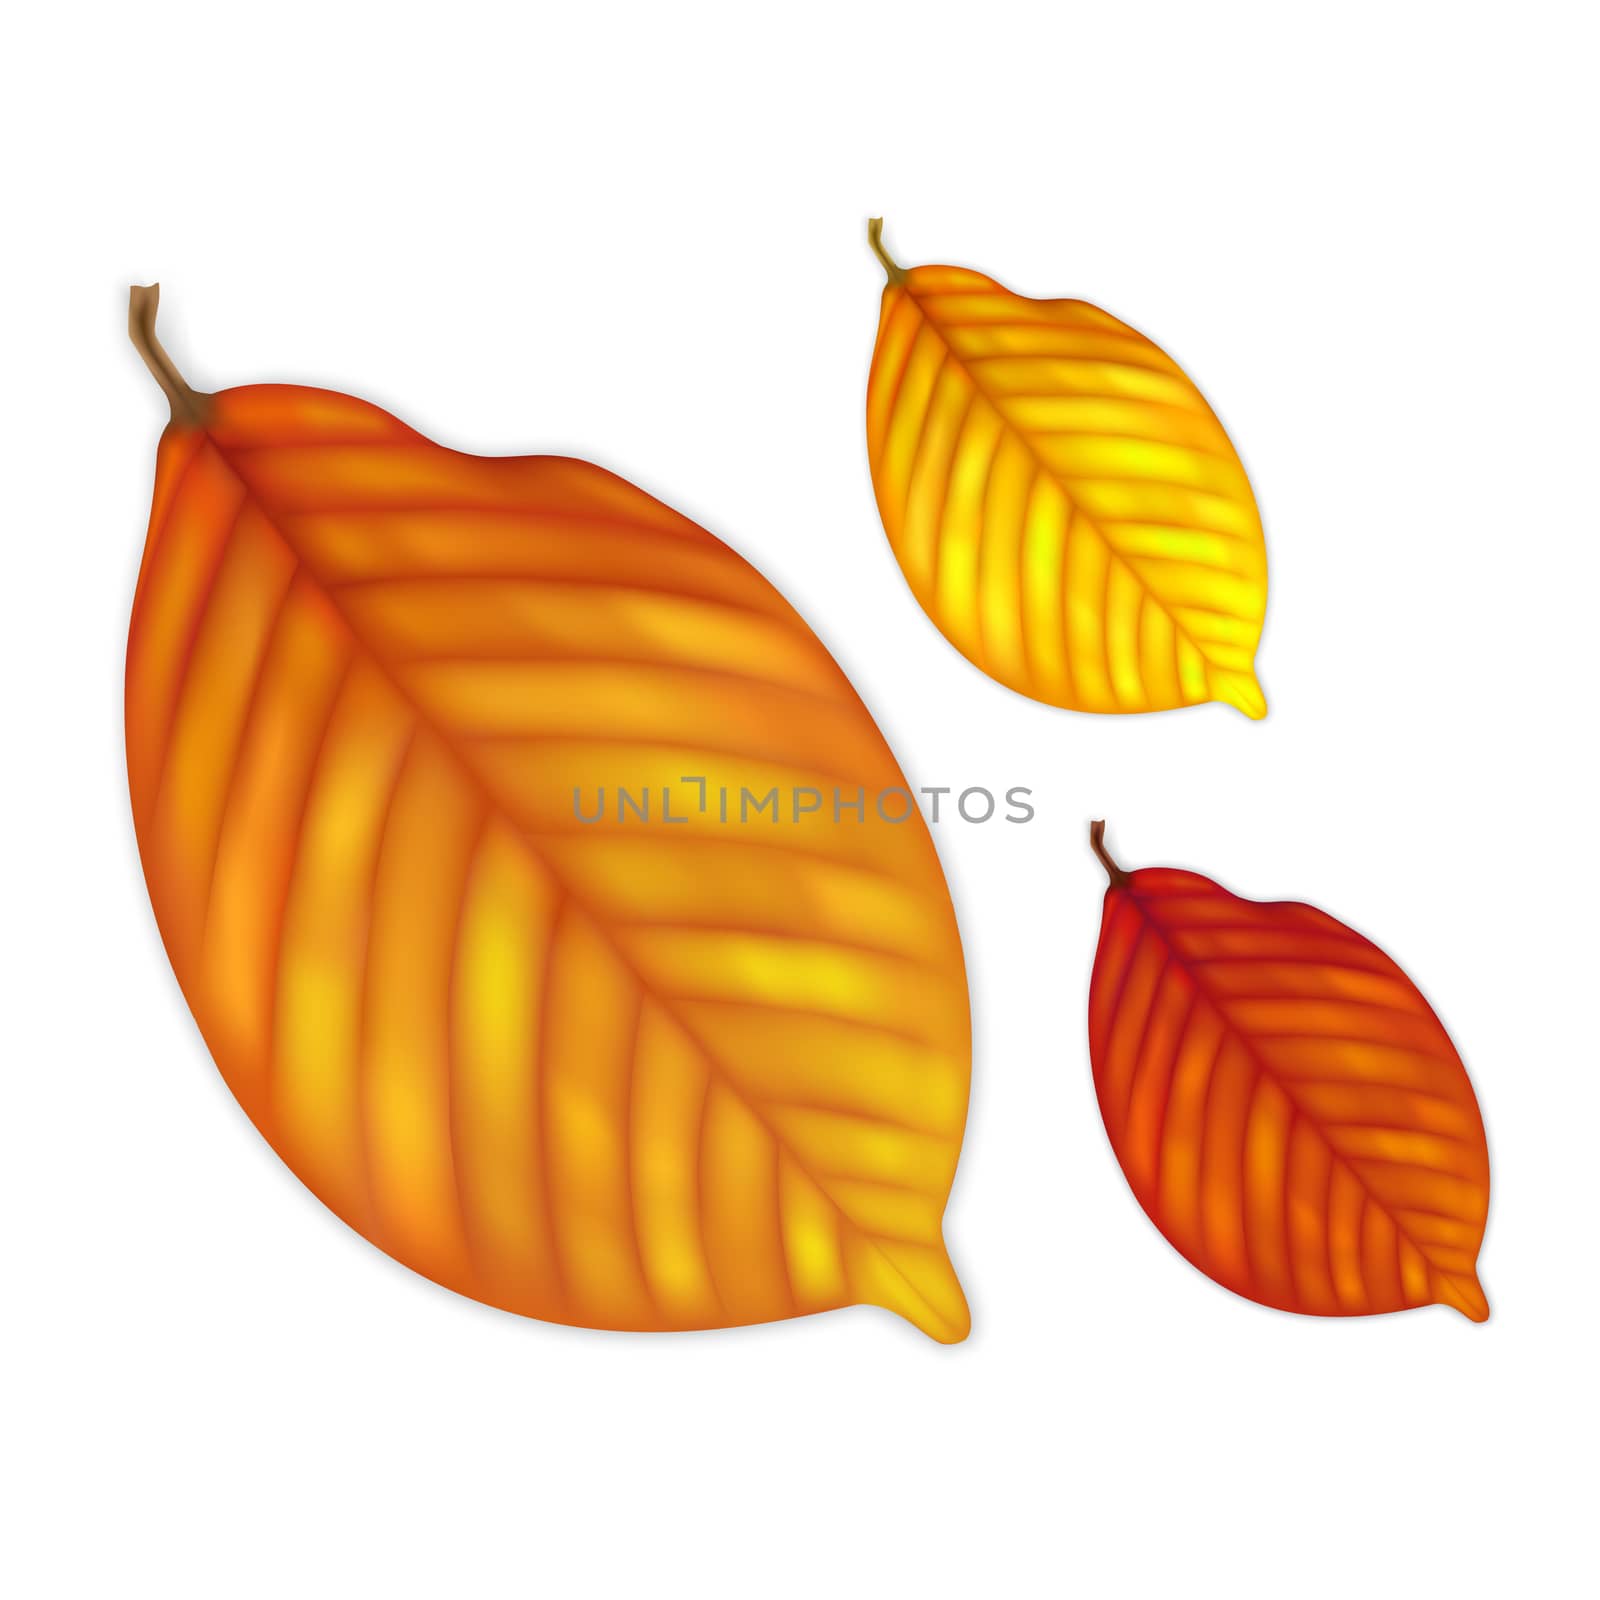 Highly detailed autumn leaves by wertaw